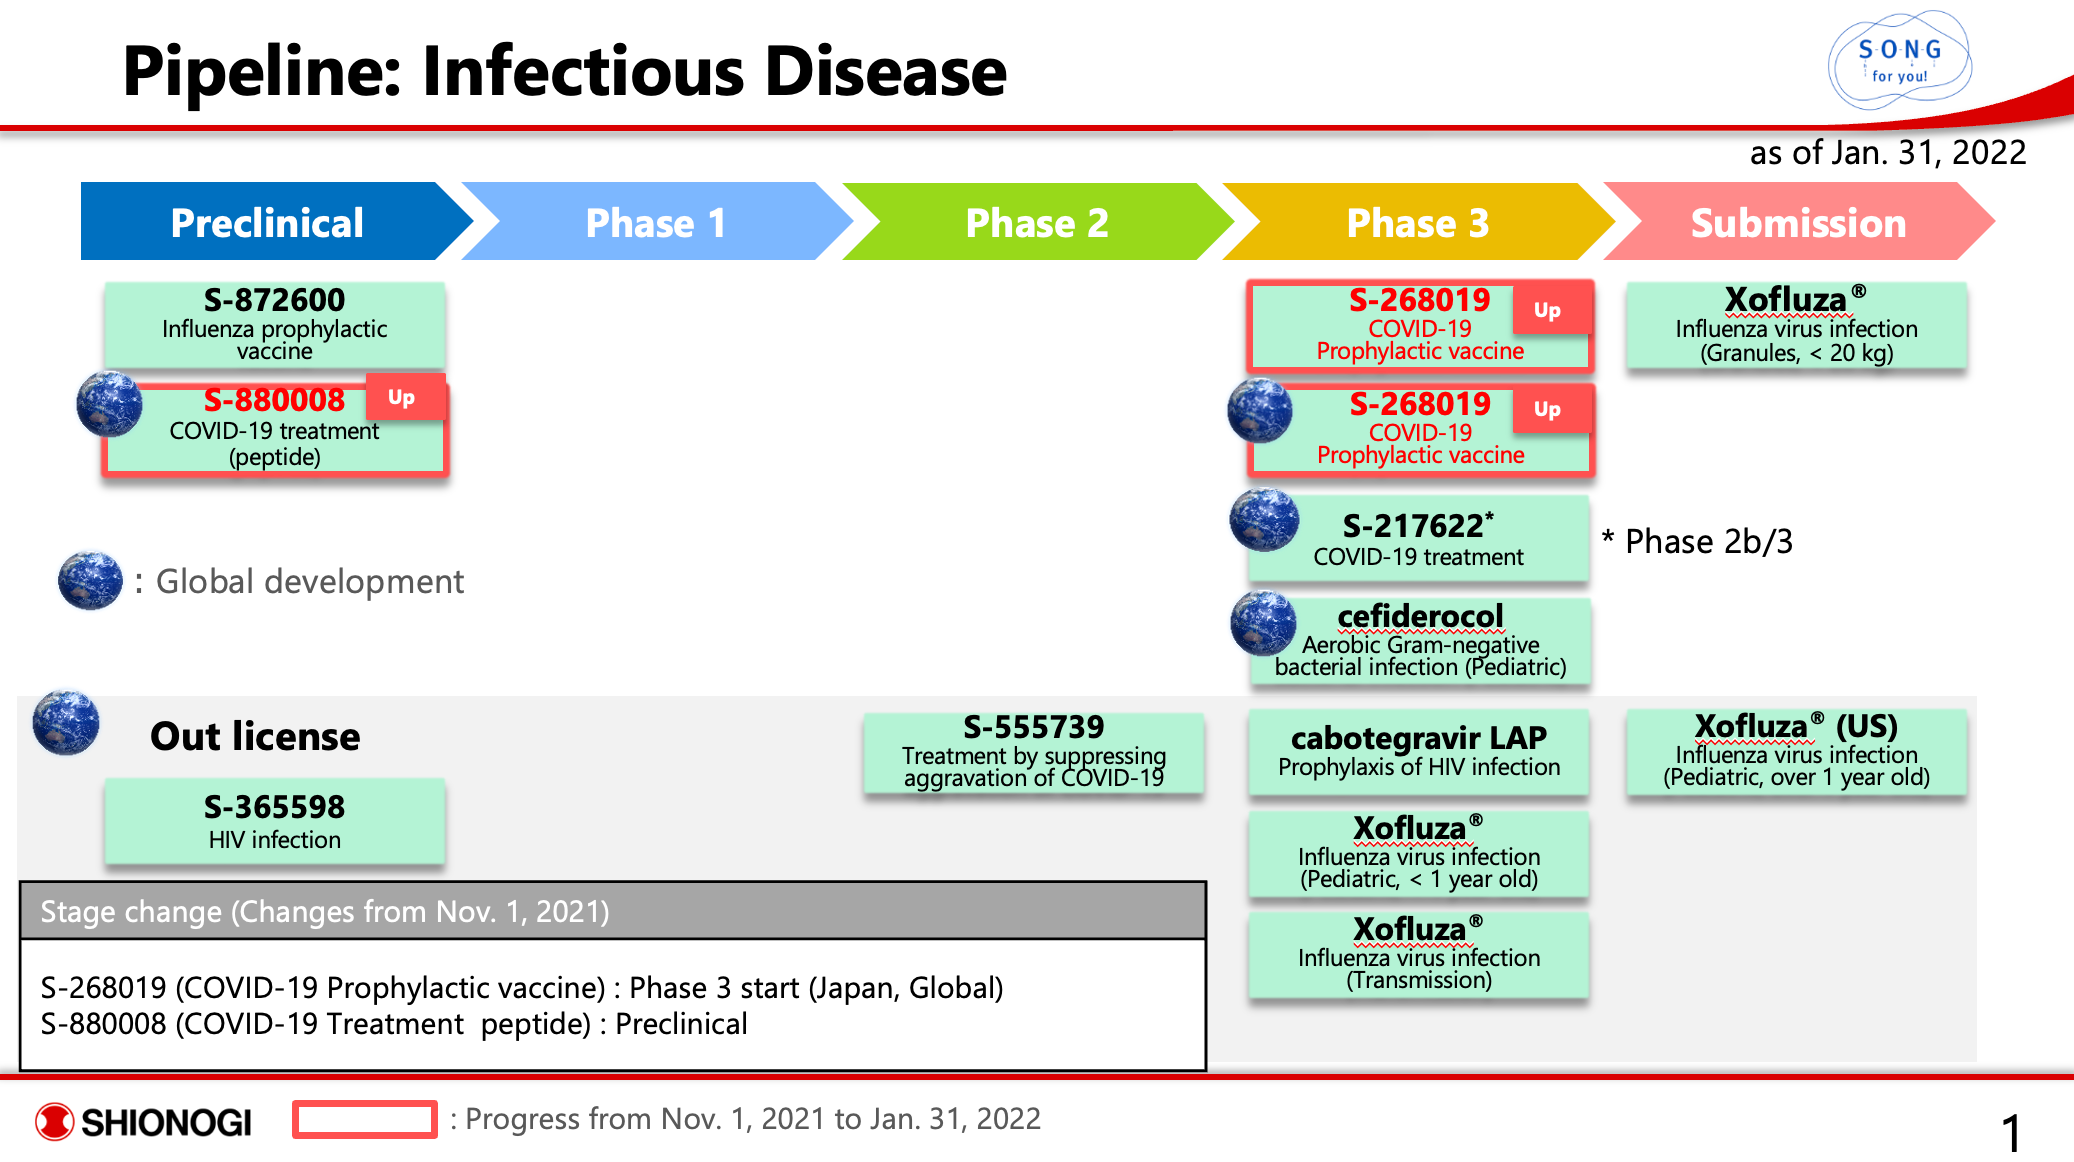 Image, courtesy of Shionogi, details their infectious disease pipeline.